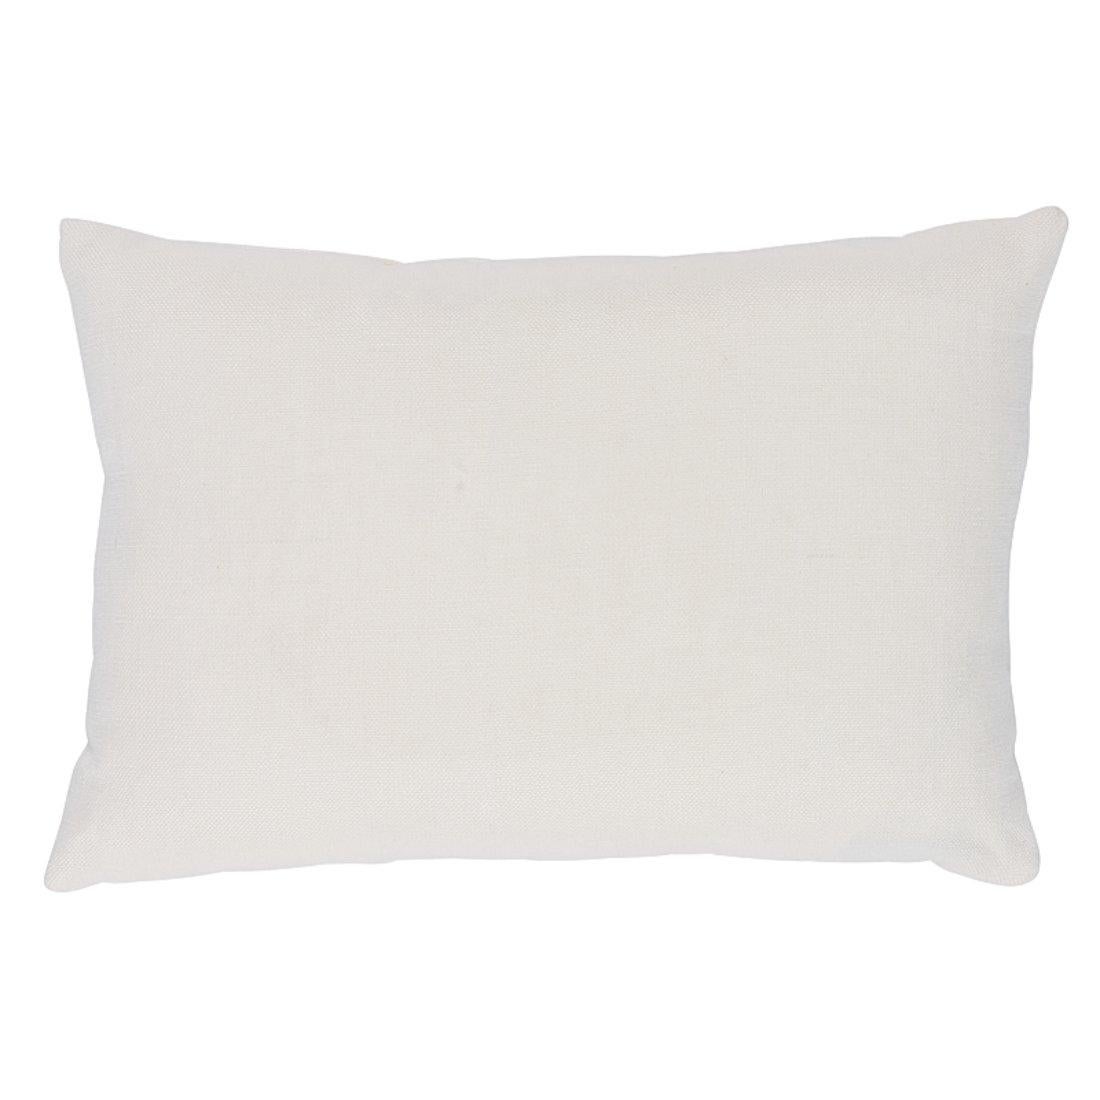 This pillow features Berkeley tape. This nubby and textural linen-cotton blend has a wonderful weight and hand—it's a versatile building-block fabric. Subtle variations are part of its inherent natural beauty. Body of pillow is Barnett. Pillow